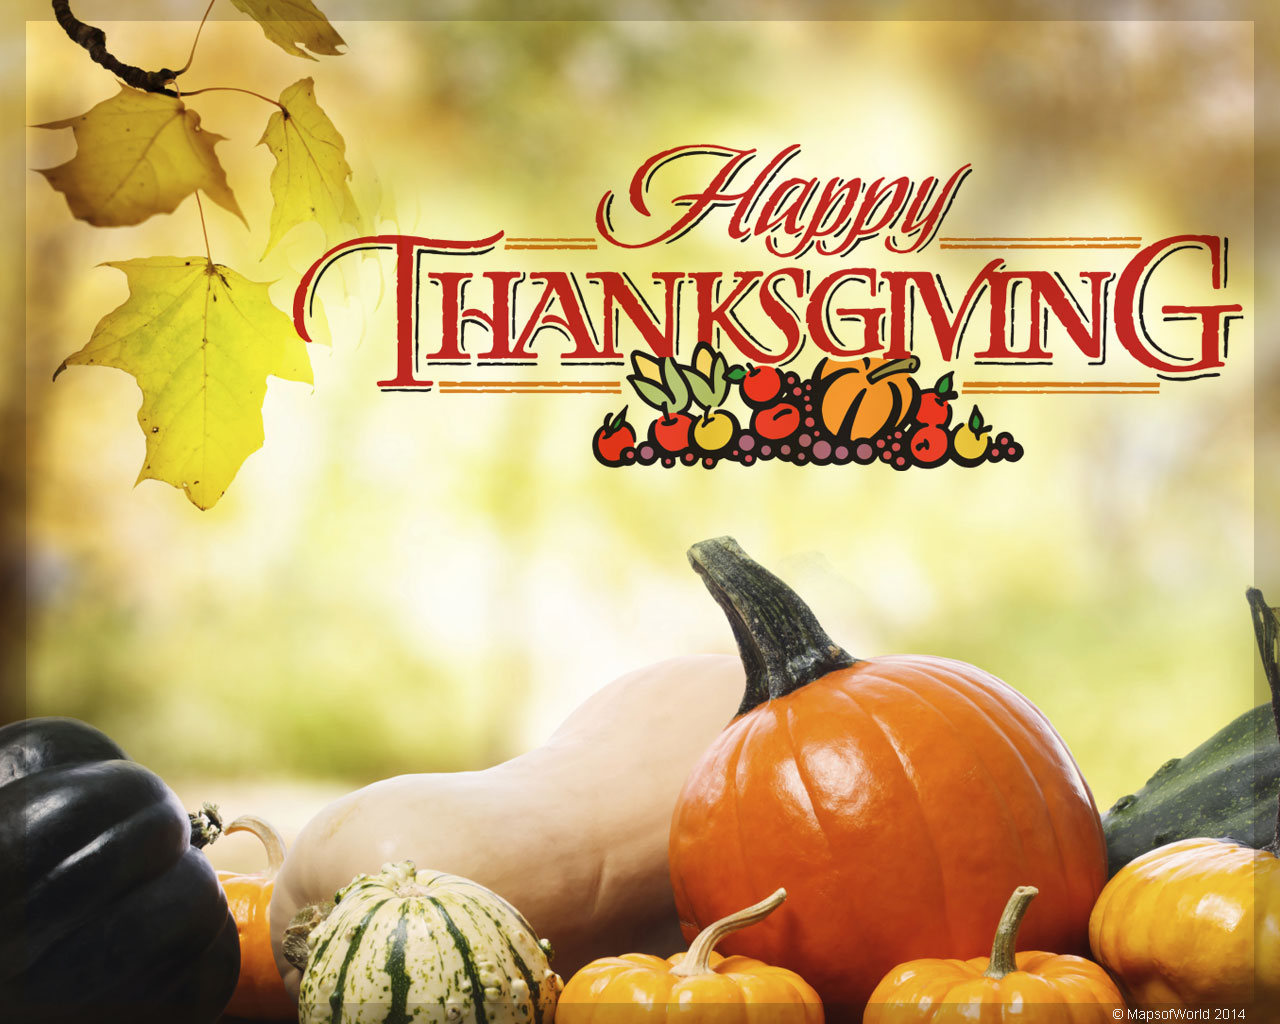 🔥 Free download Thanksgiving Wallpapers Free Download [1280x1024] for